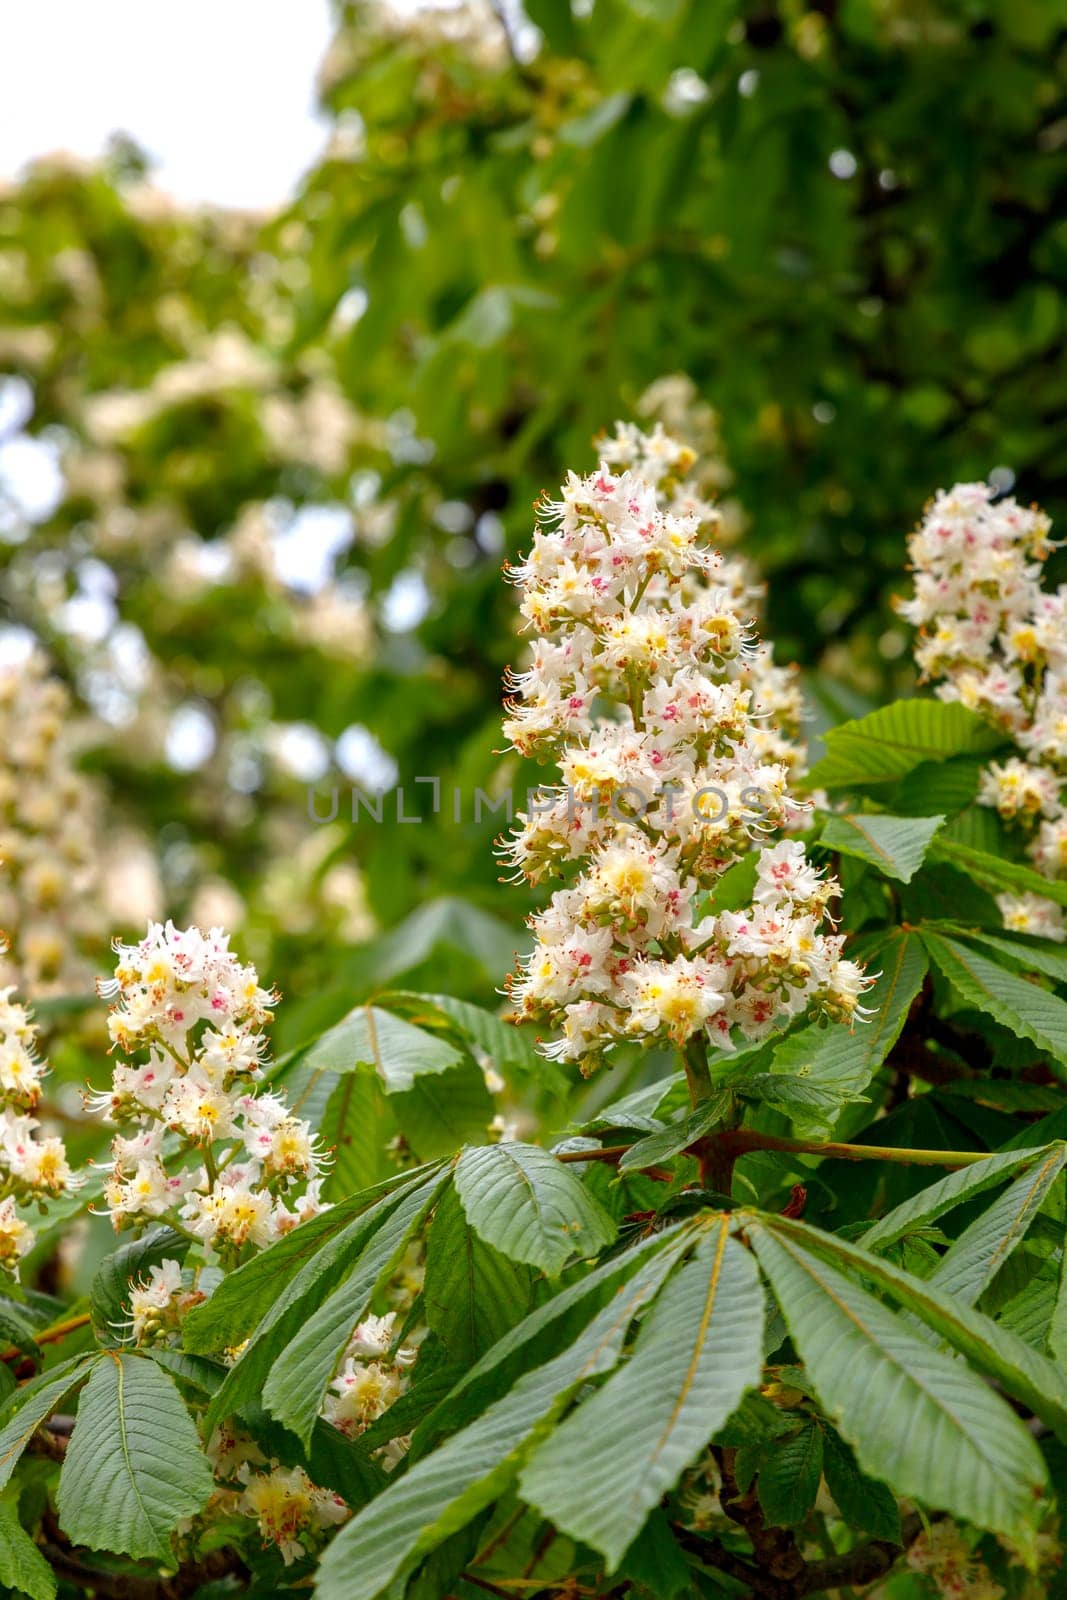 White chestnut blossom with tiny tender flowers and green leaves 